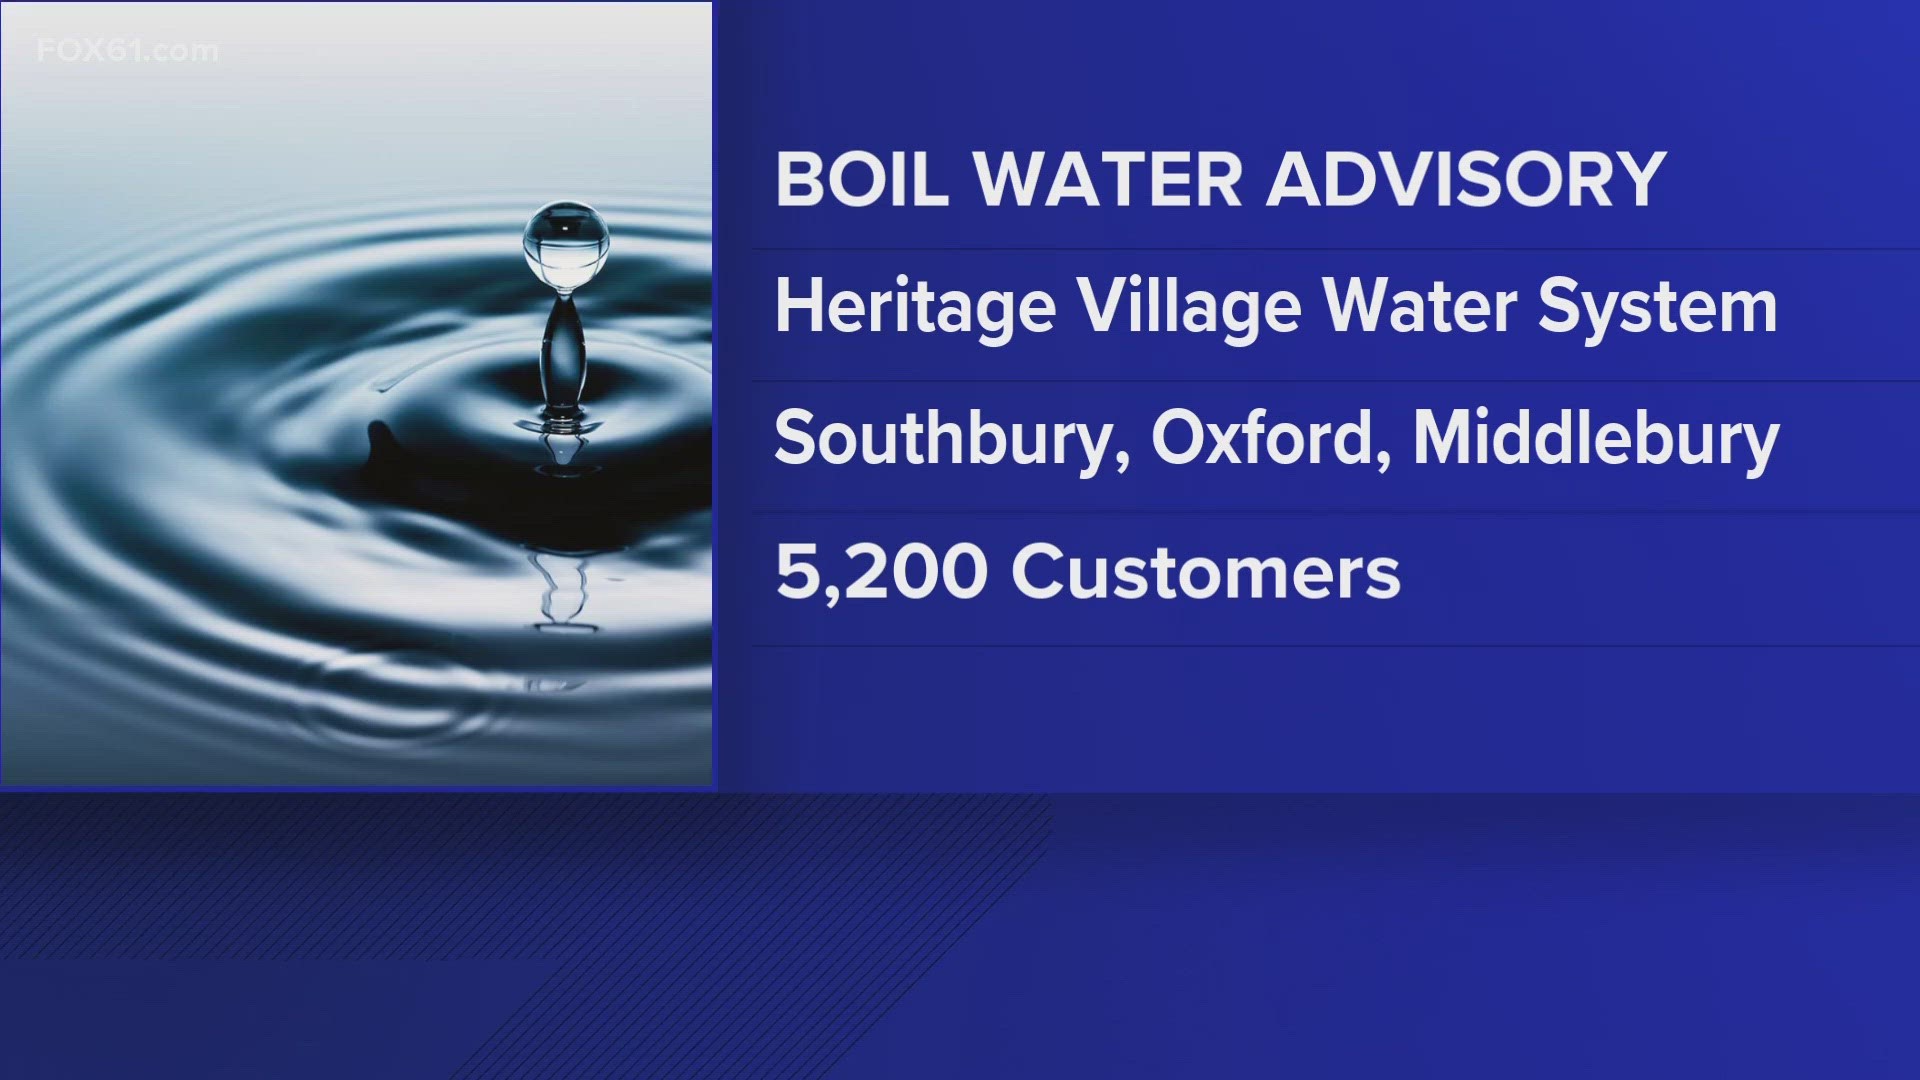 Boil water order lapses in Schenectady